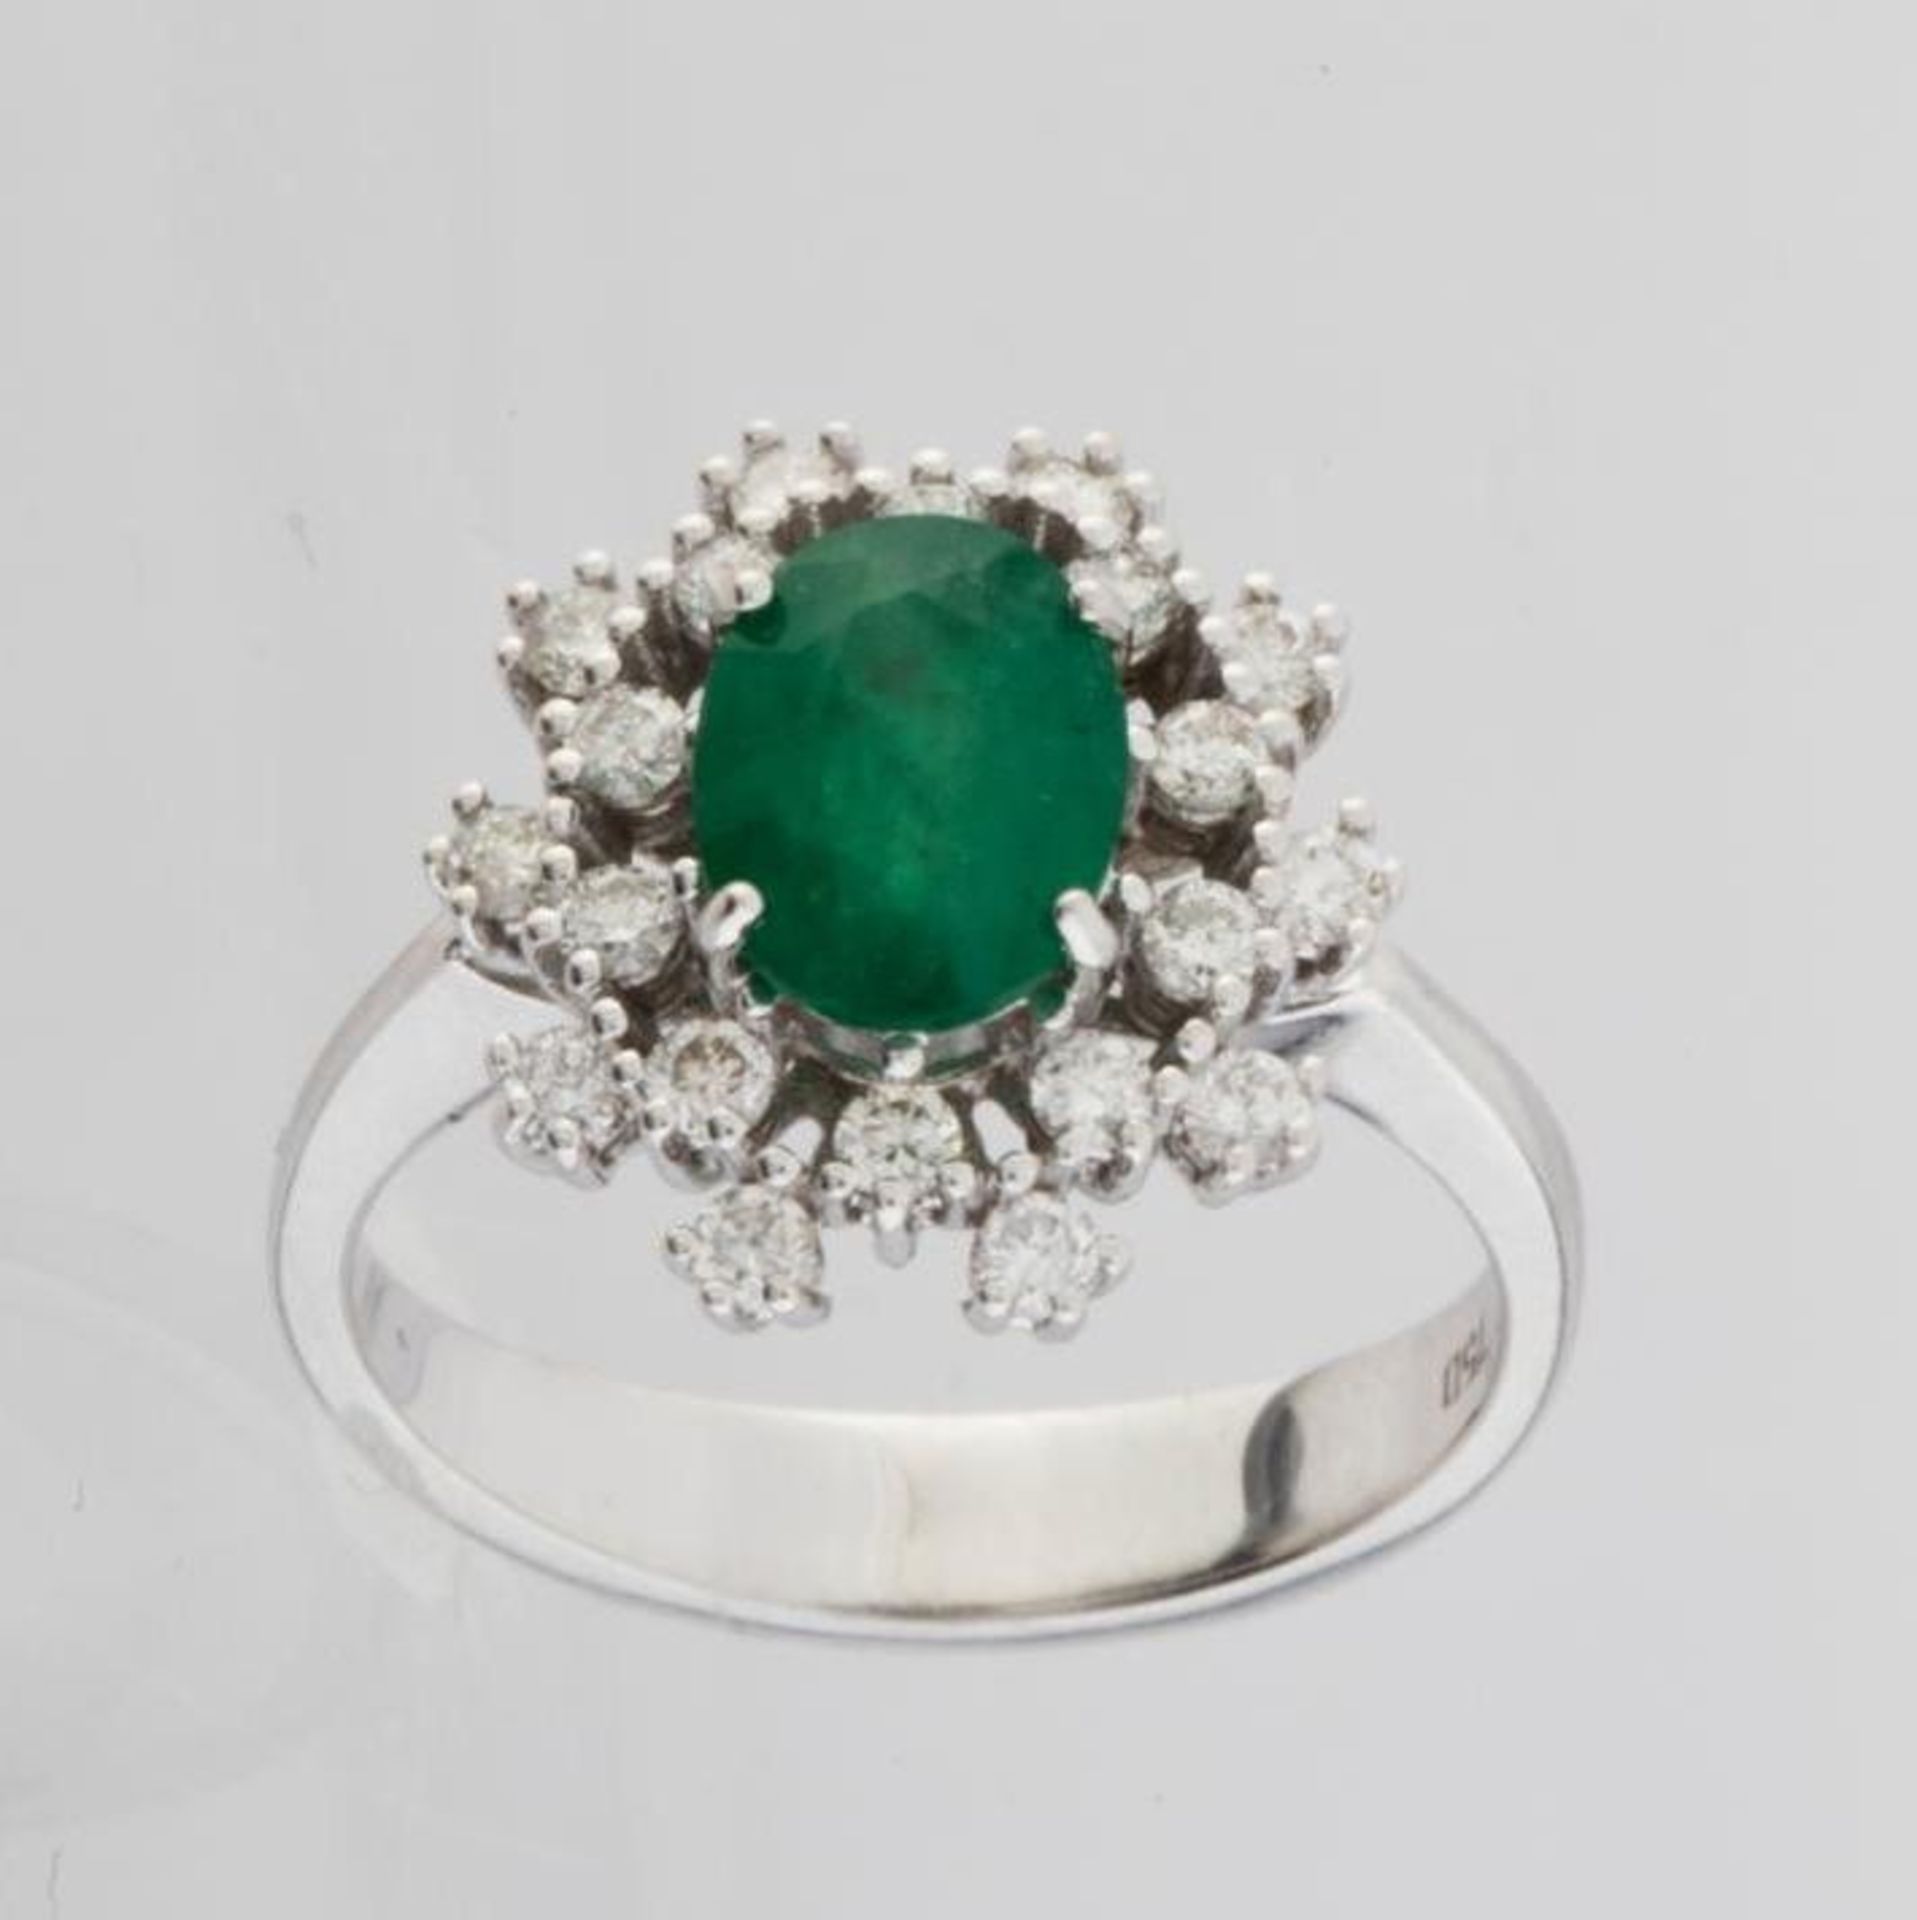 Certificated 18K White Gold Diamond & Emerald Ring - Image 3 of 4